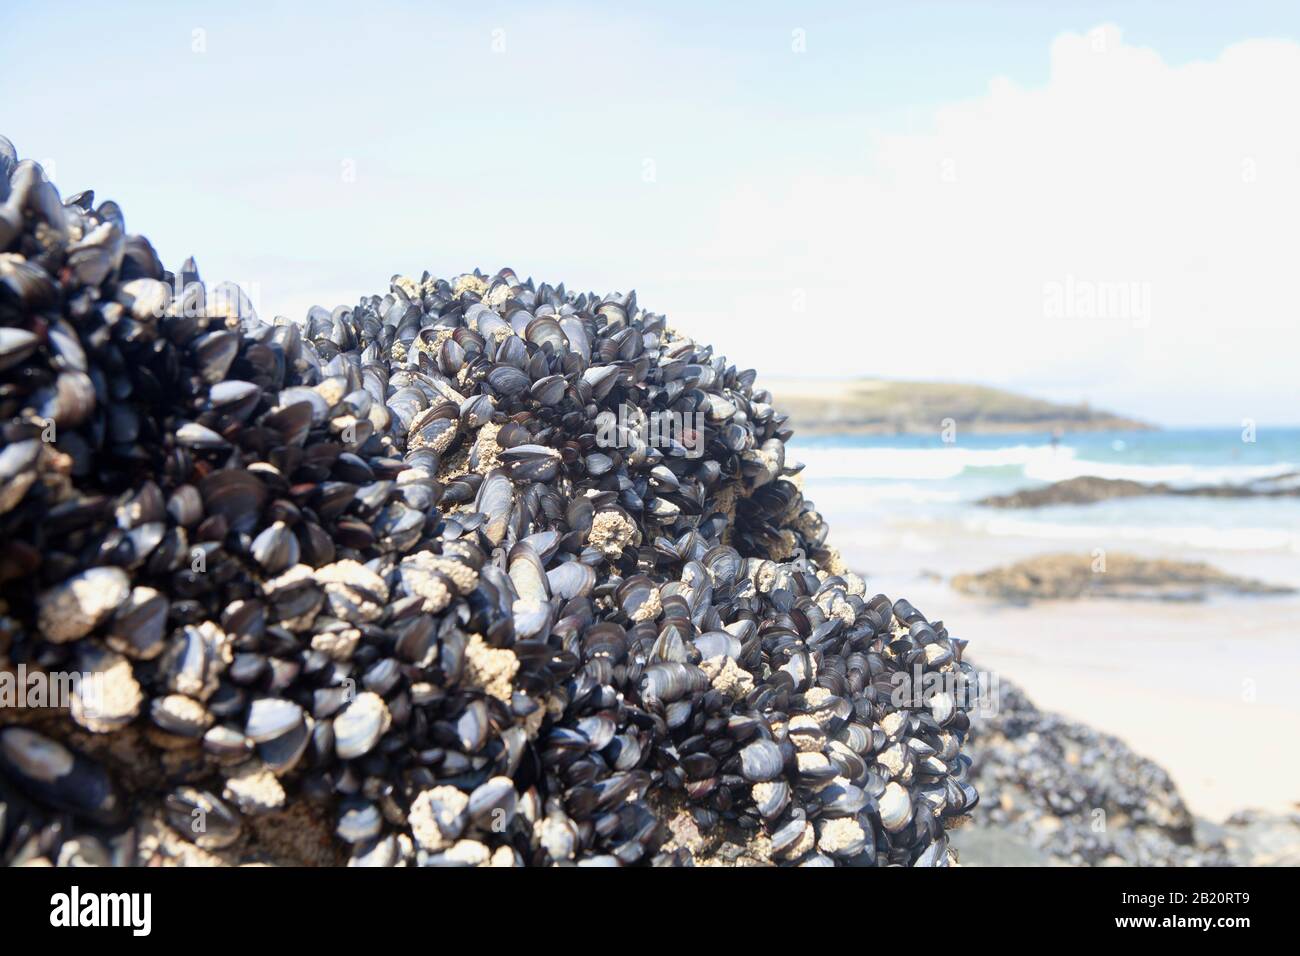 A large rock exposed at low tide, covered in mussels. Harlyn Bay, North Cornwall, UK. Stock Photo